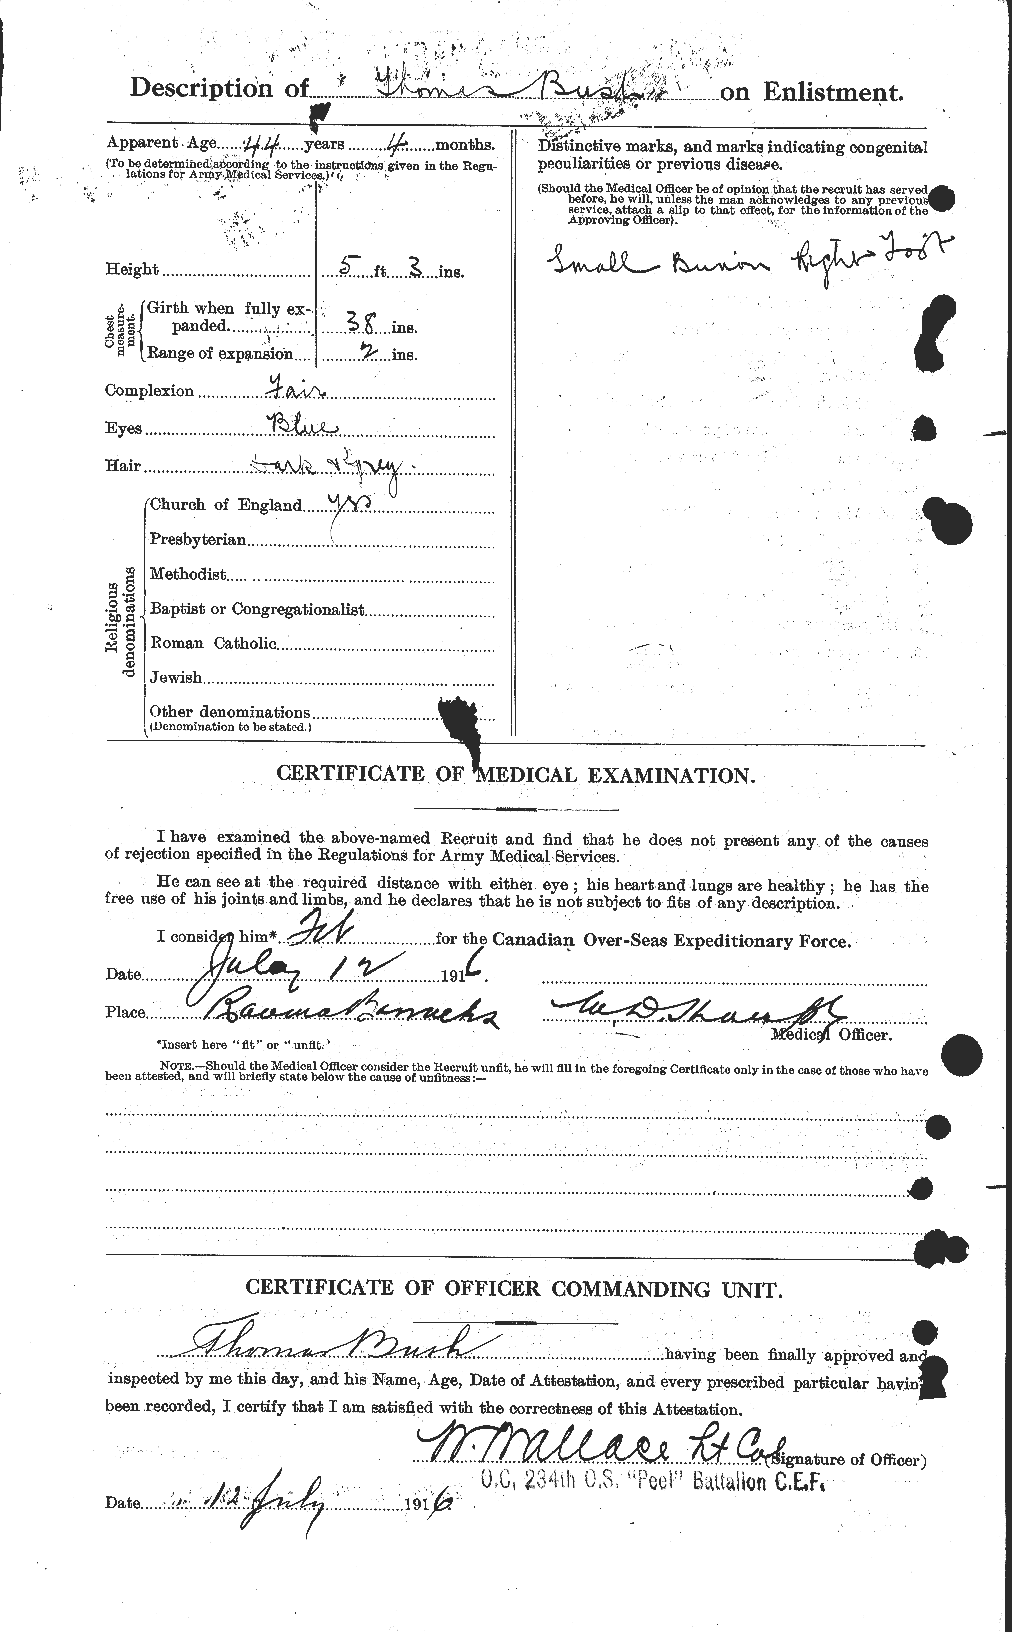 Personnel Records of the First World War - CEF 274426b